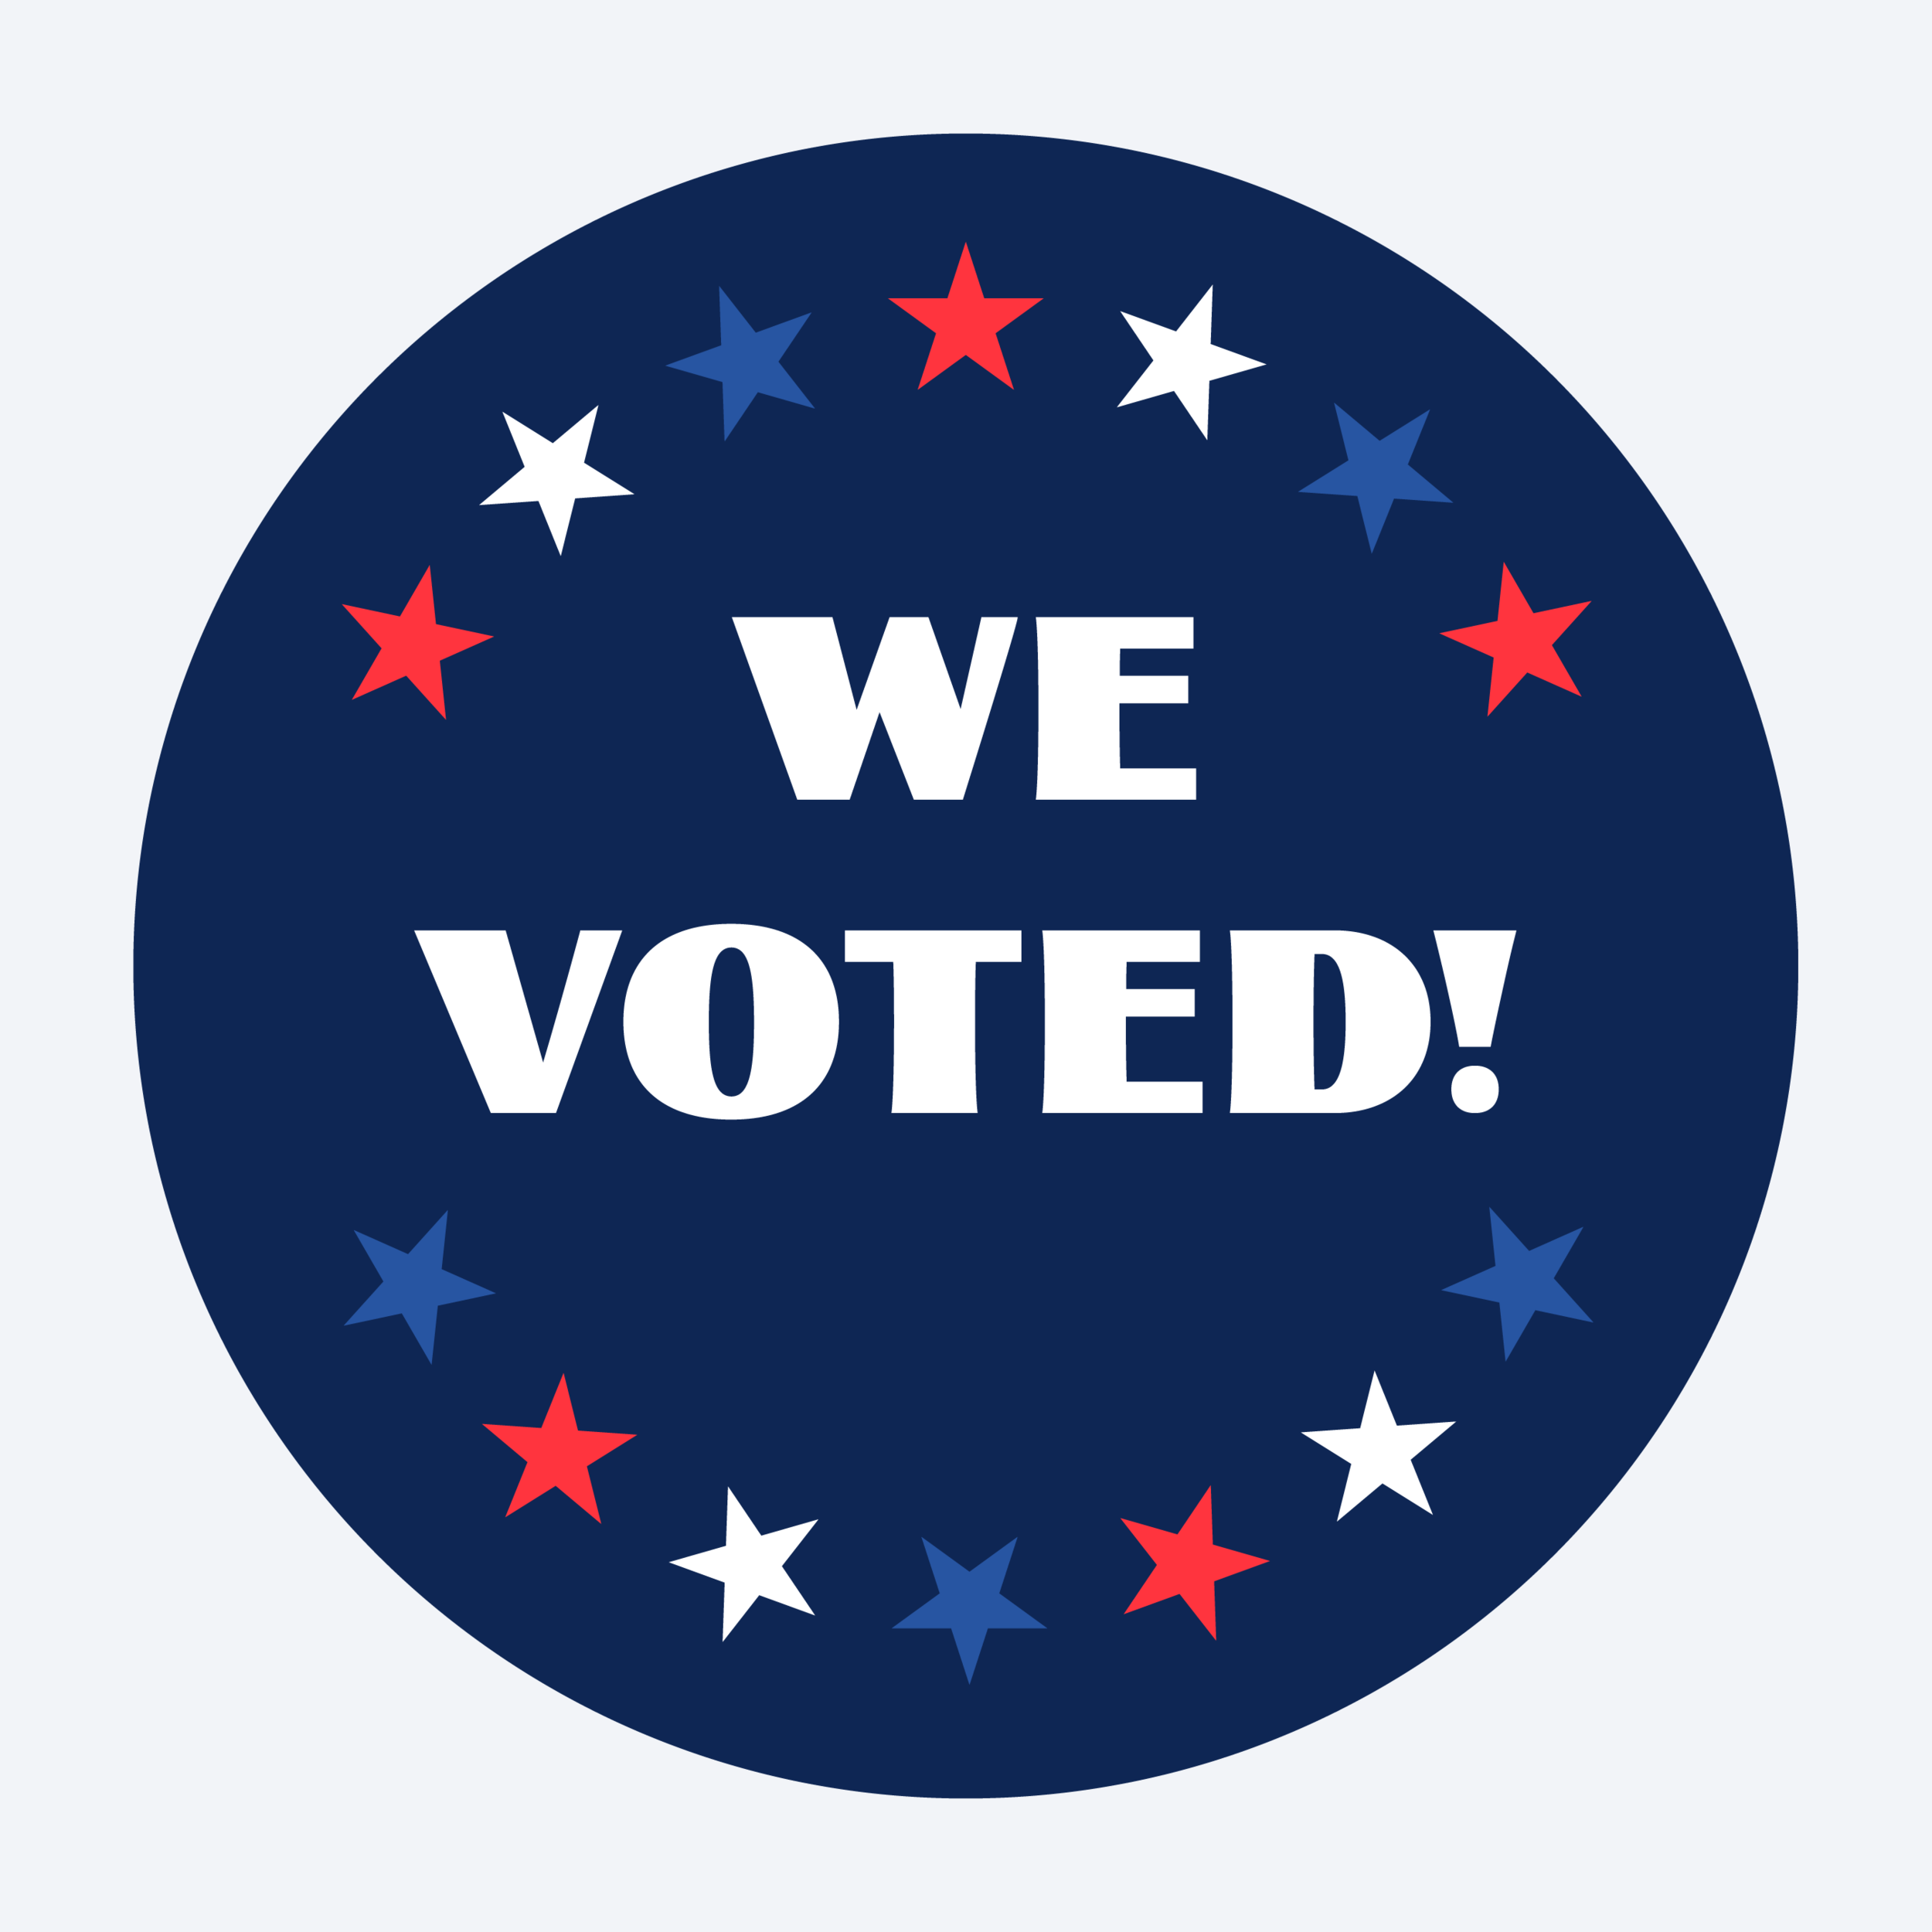 WeVoted-Stickers_Artboard 1 copy 2.png